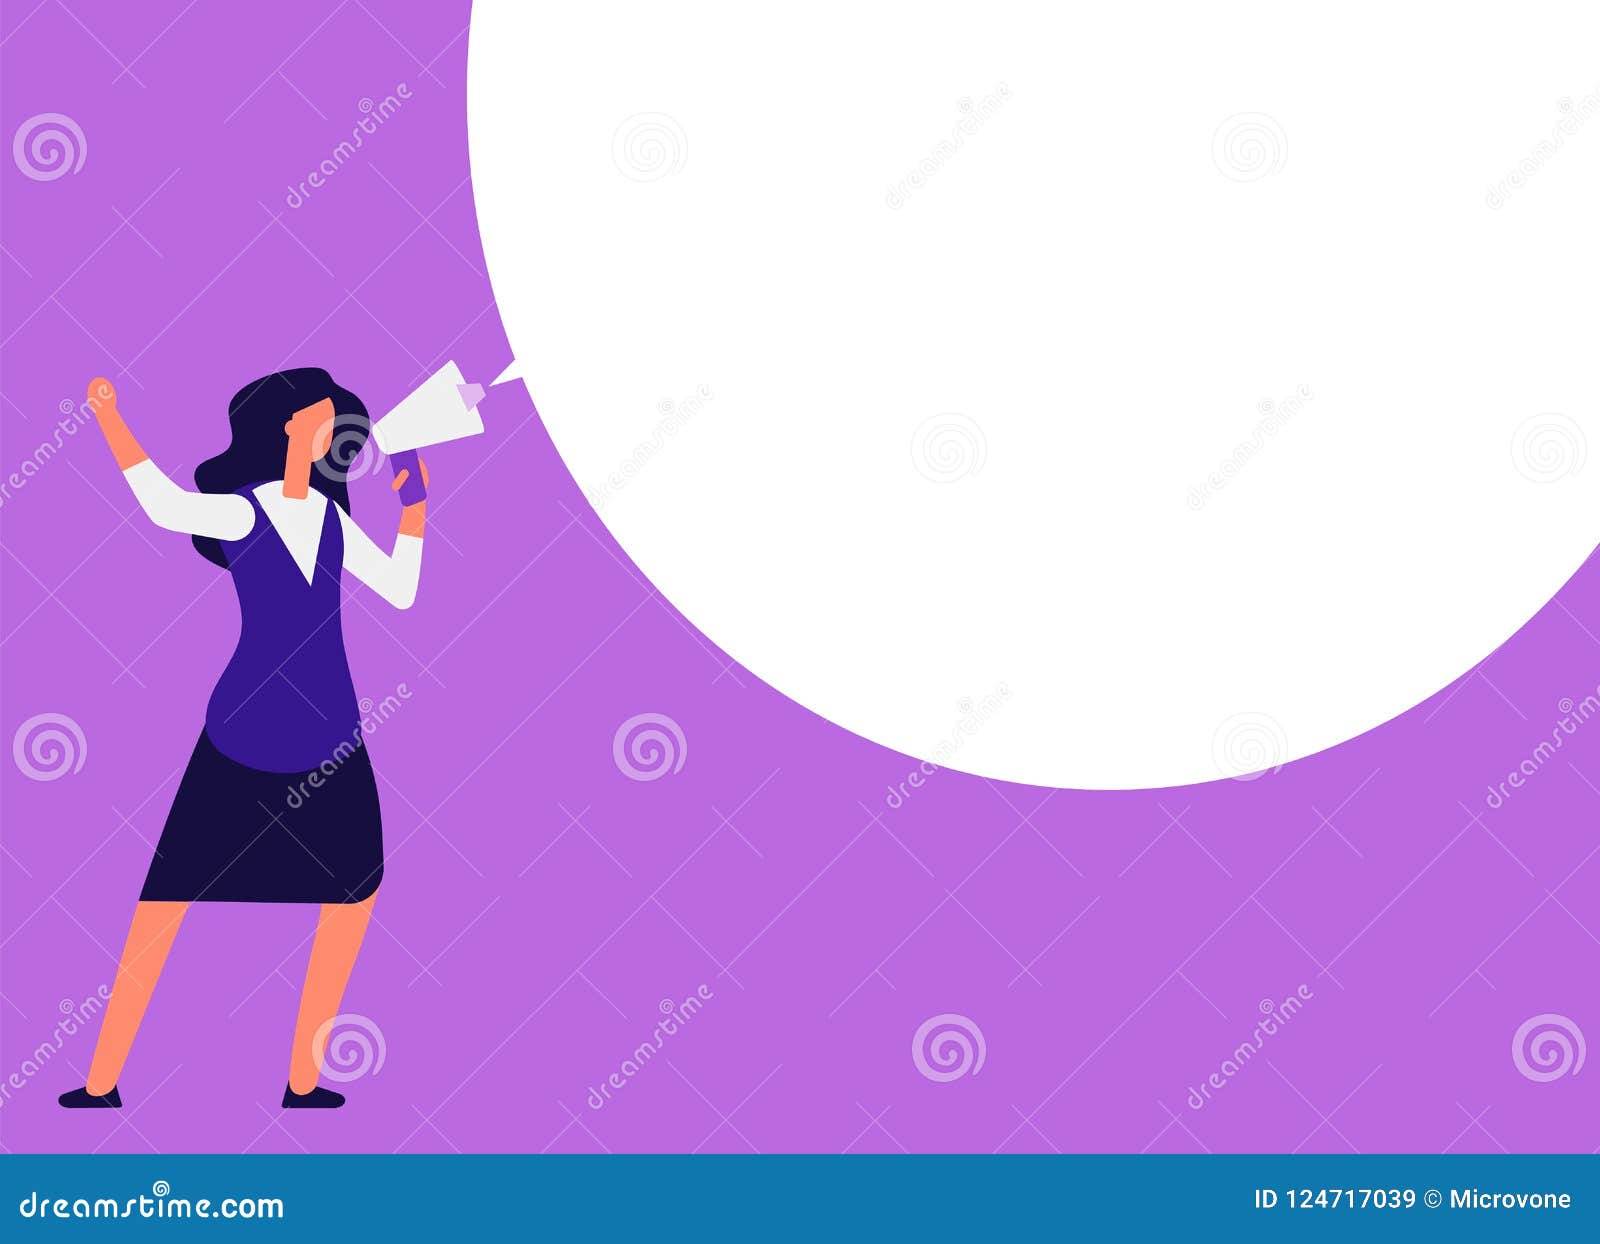 businesswoman with megaphone. woman shouting in bullhorn with speech bubble for message. announcement, event marketing